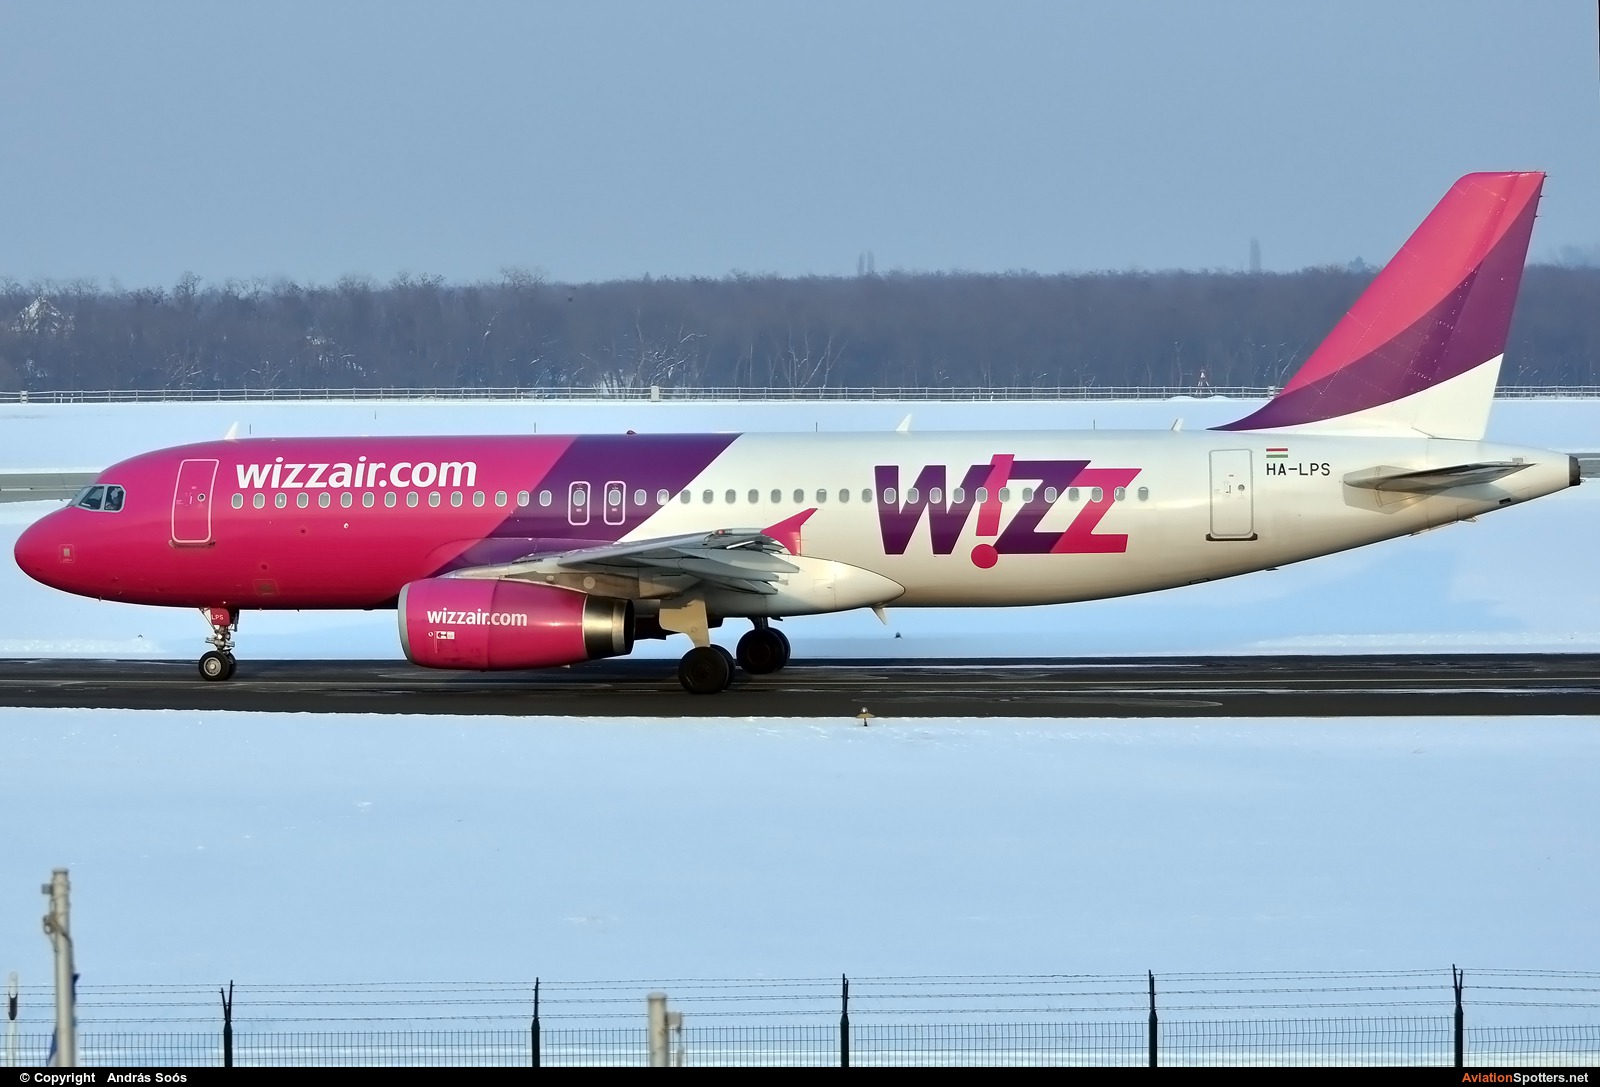 Wizz Air  -  A320  (HA-LPS) By András Soós (sas1965)